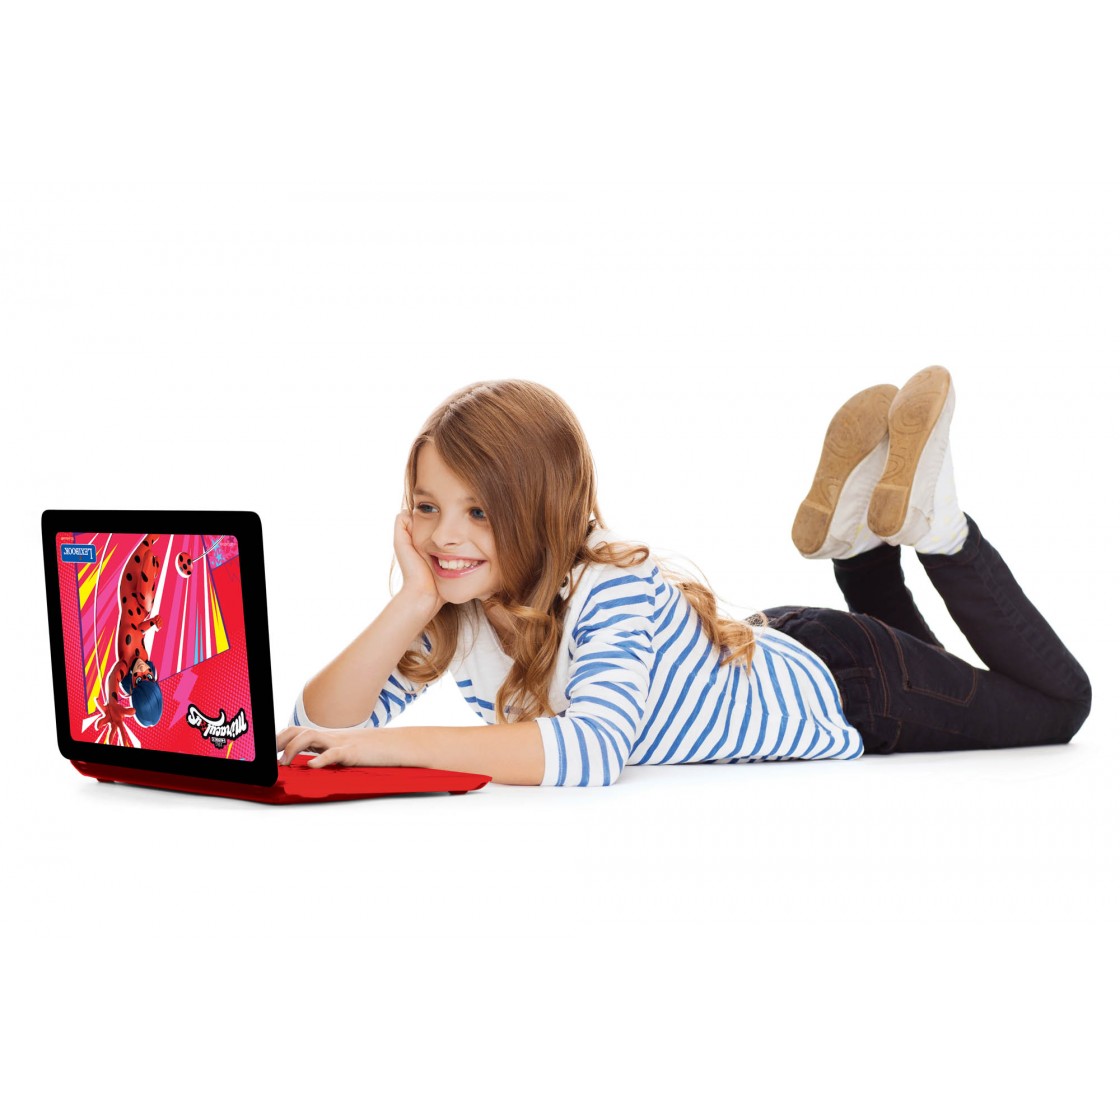 Lexibook Spider Man Bilingual Educational Laptop For Kids - English And  French